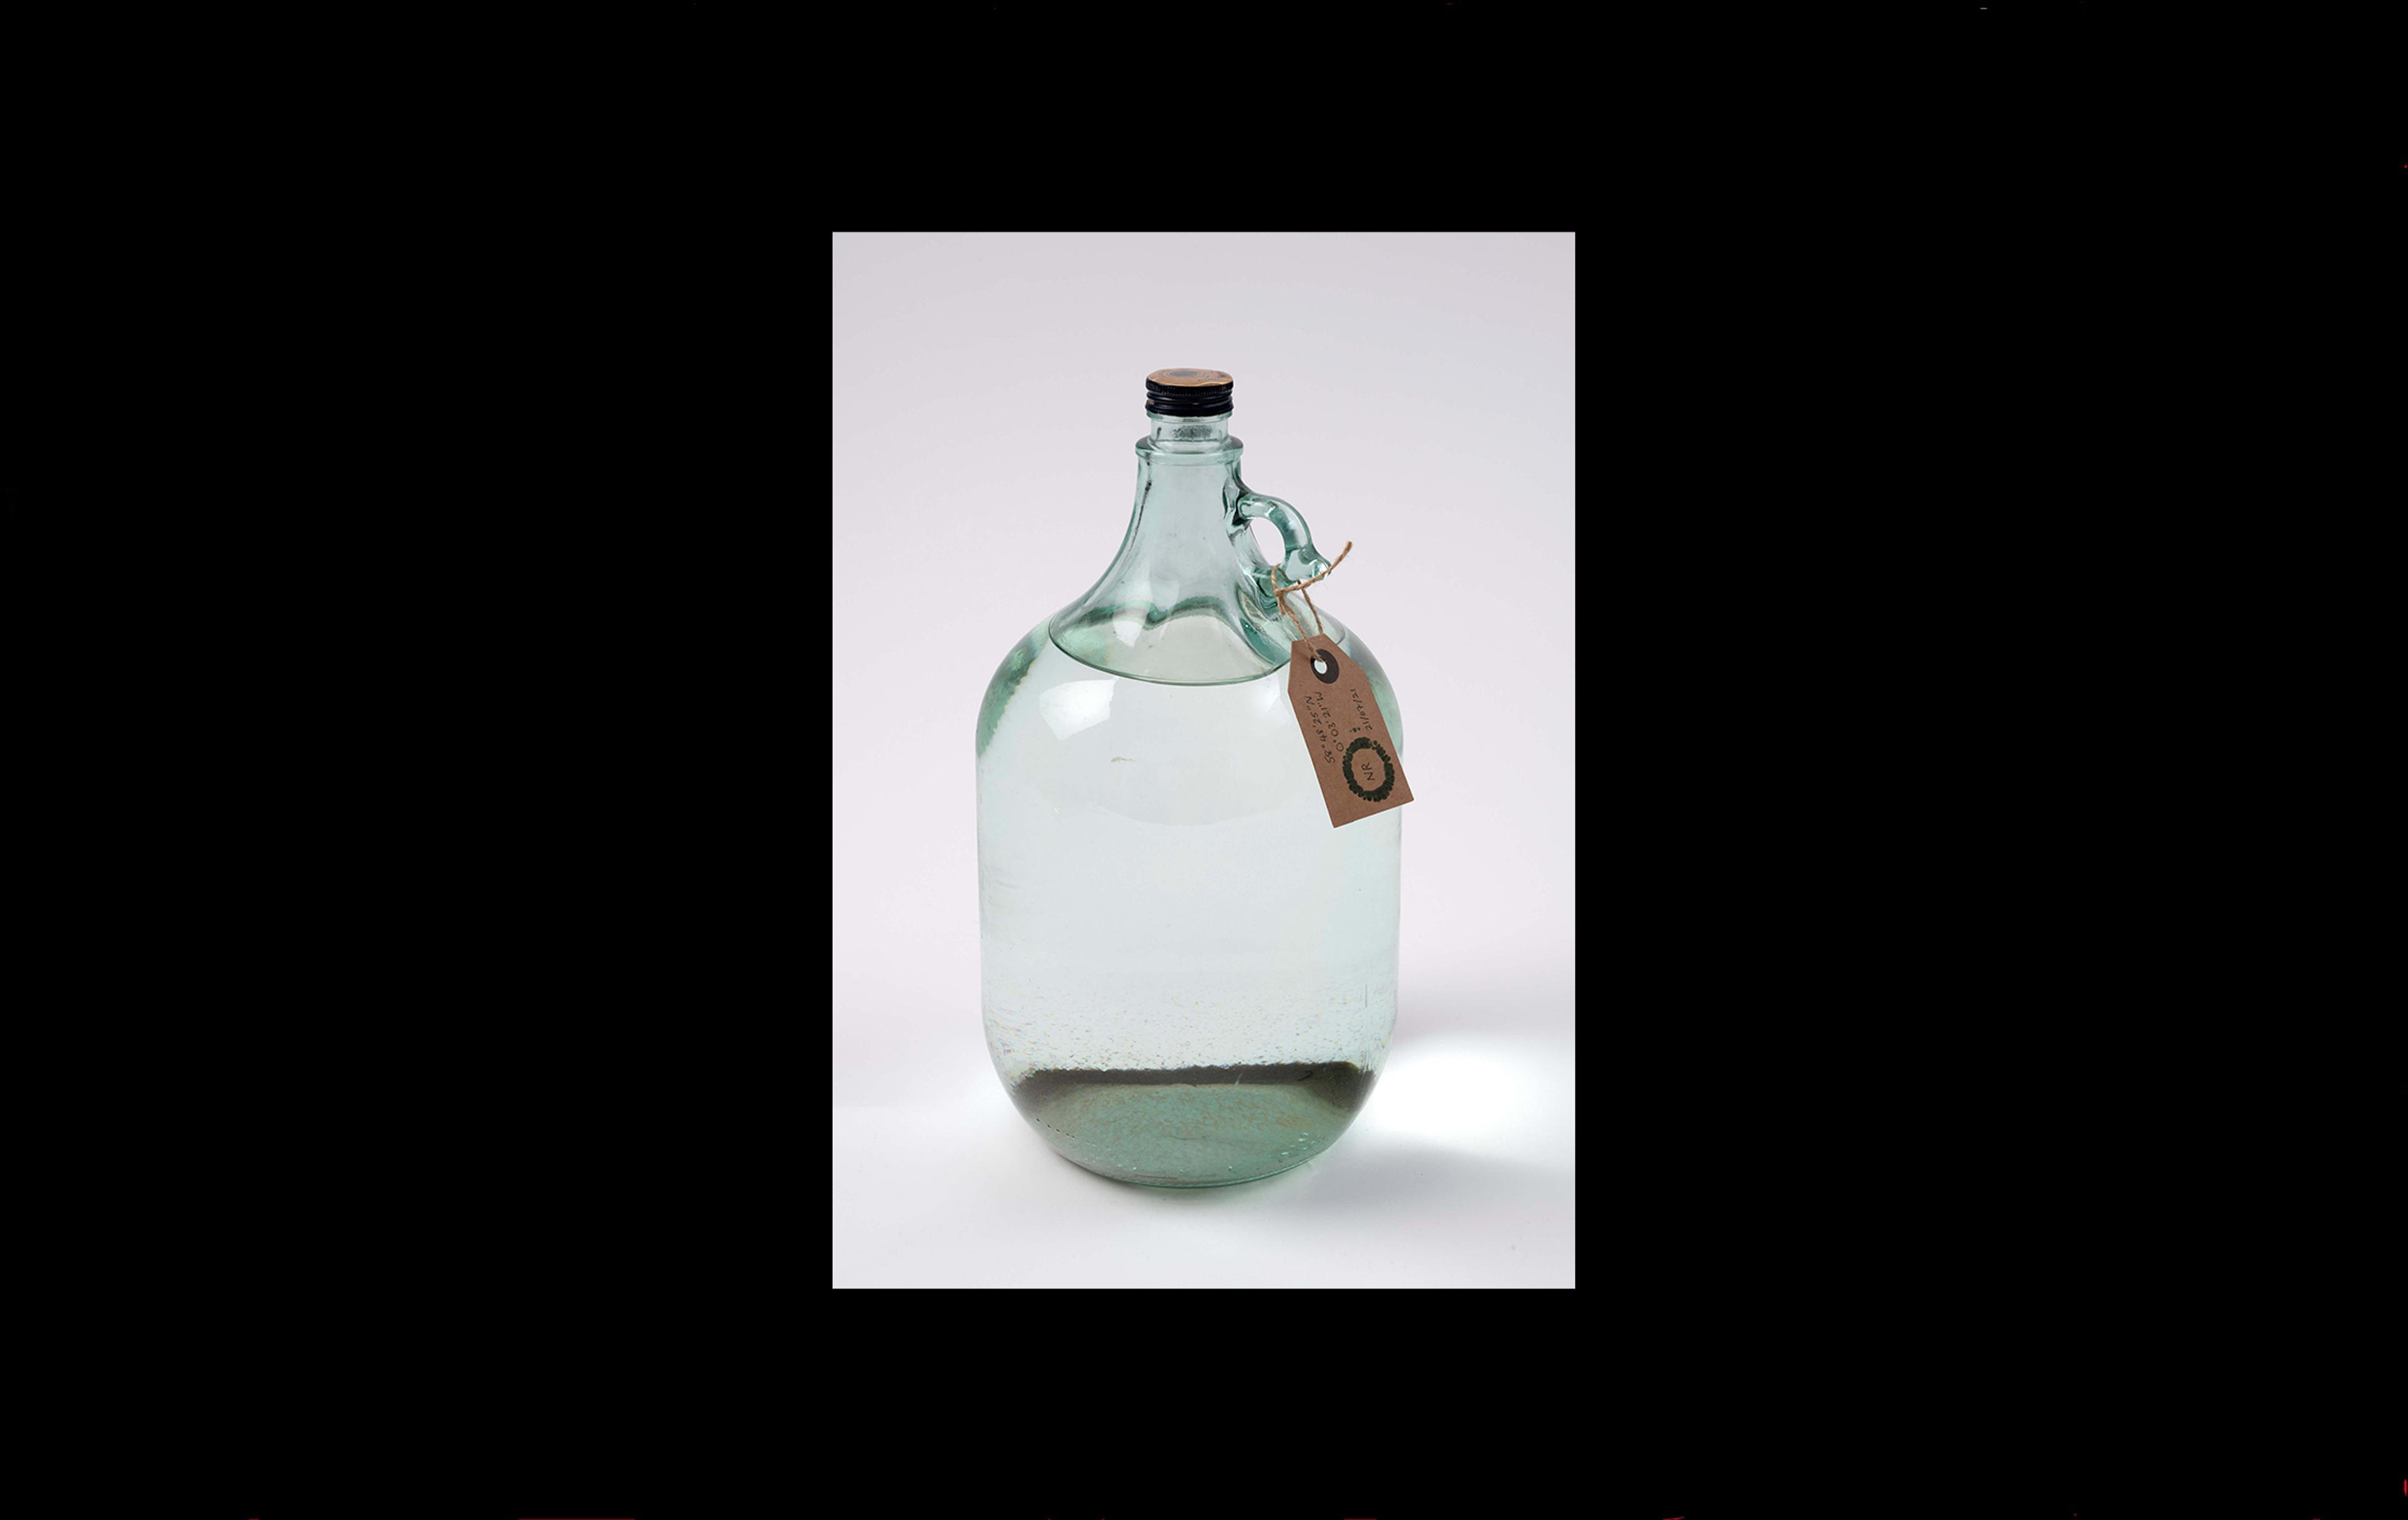 Photograph of a large glass jug full of water with a museum label around the neck